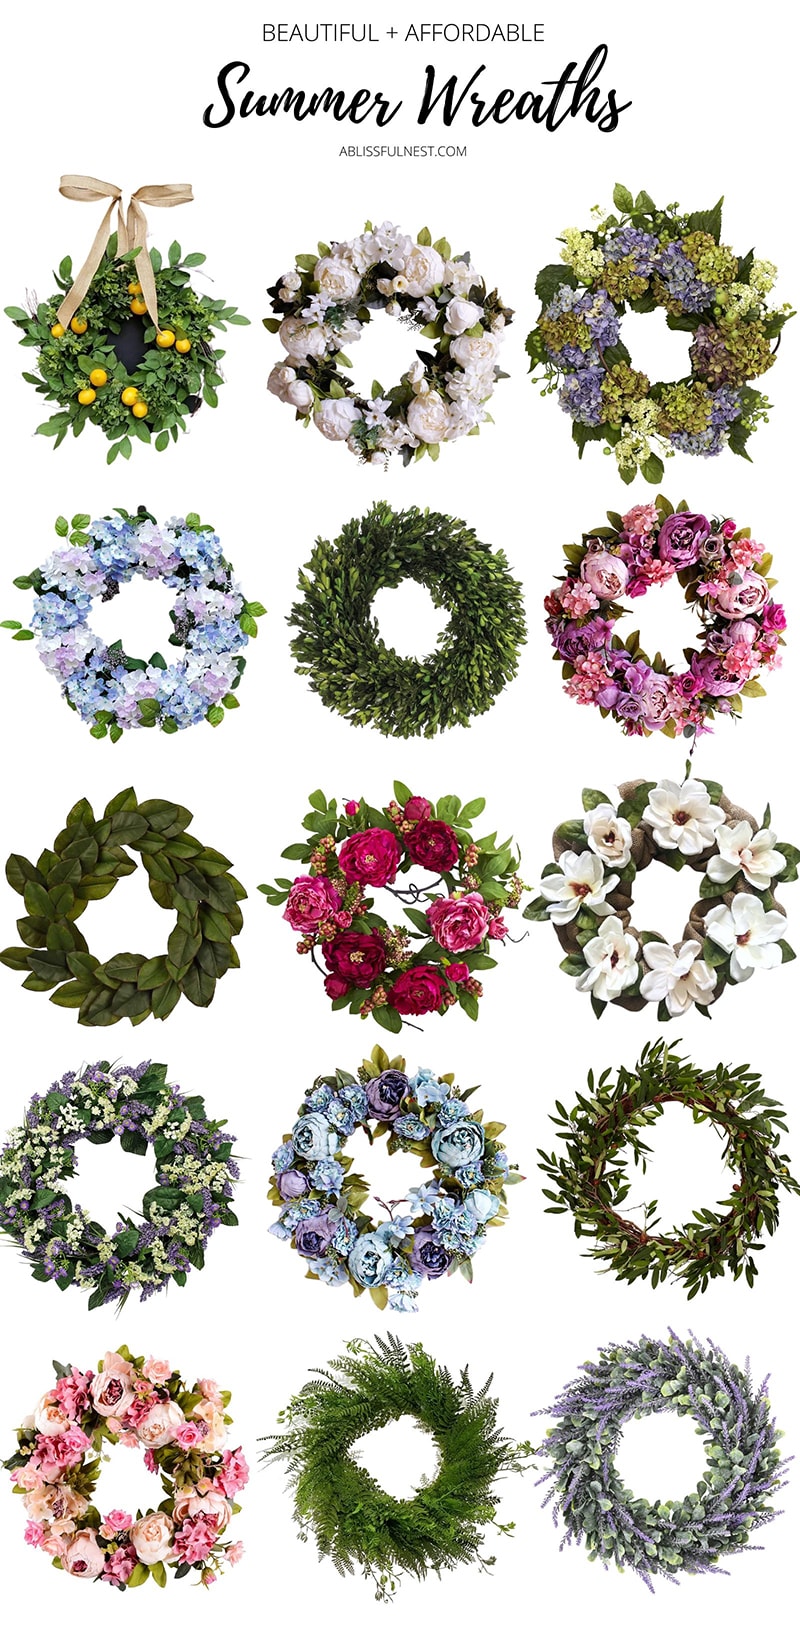 Beautiful & Affordable Summer Wreaths + Where to Buy Them